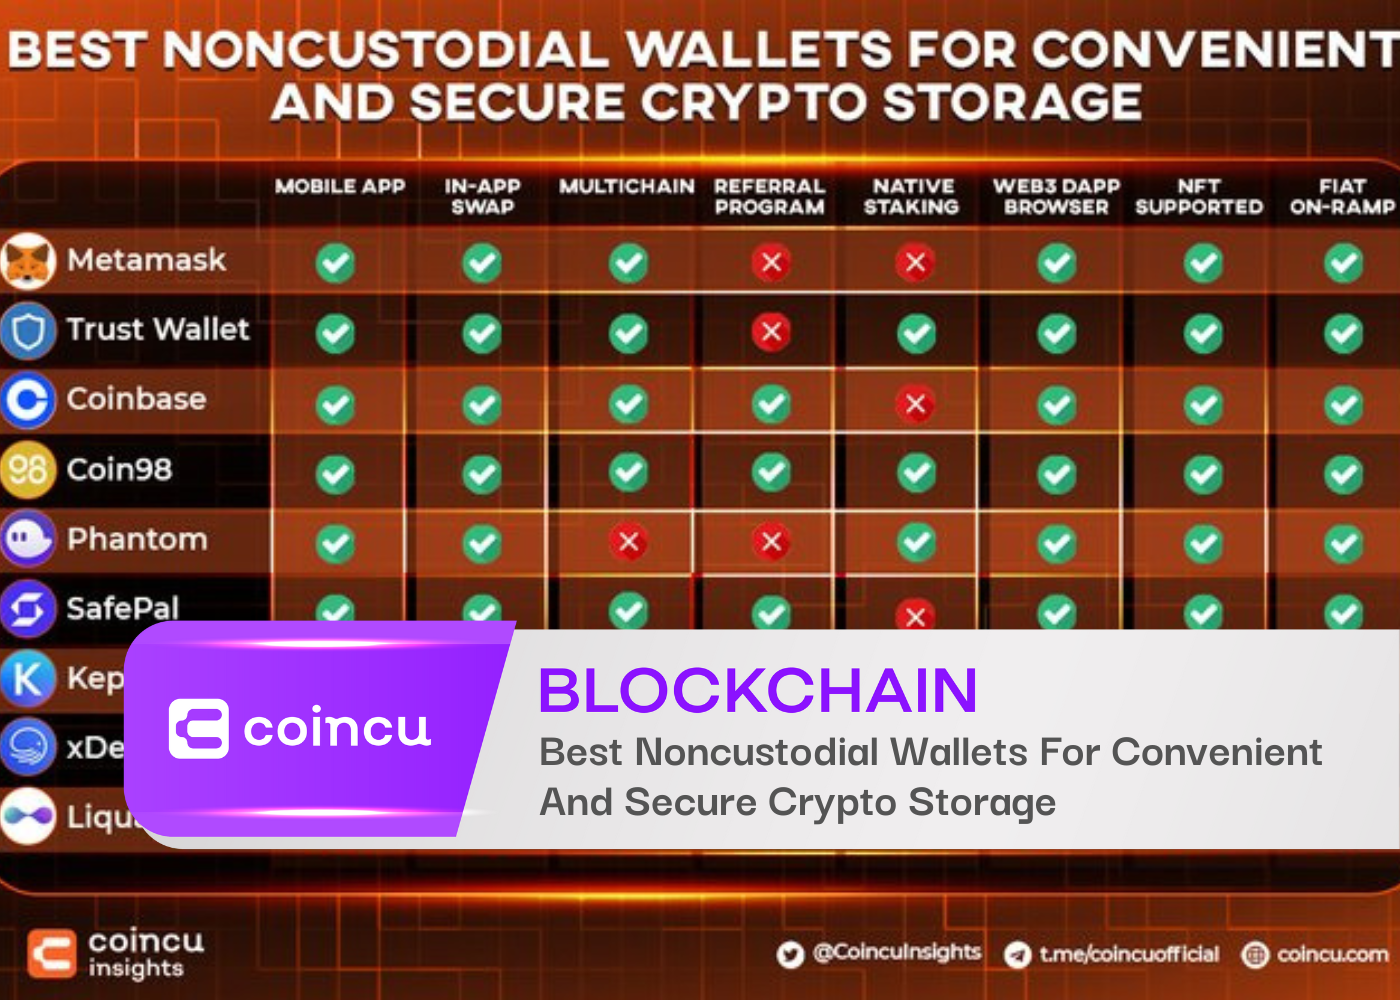 Best Noncustodial Wallets For Convenient And Secure Crypto Storage